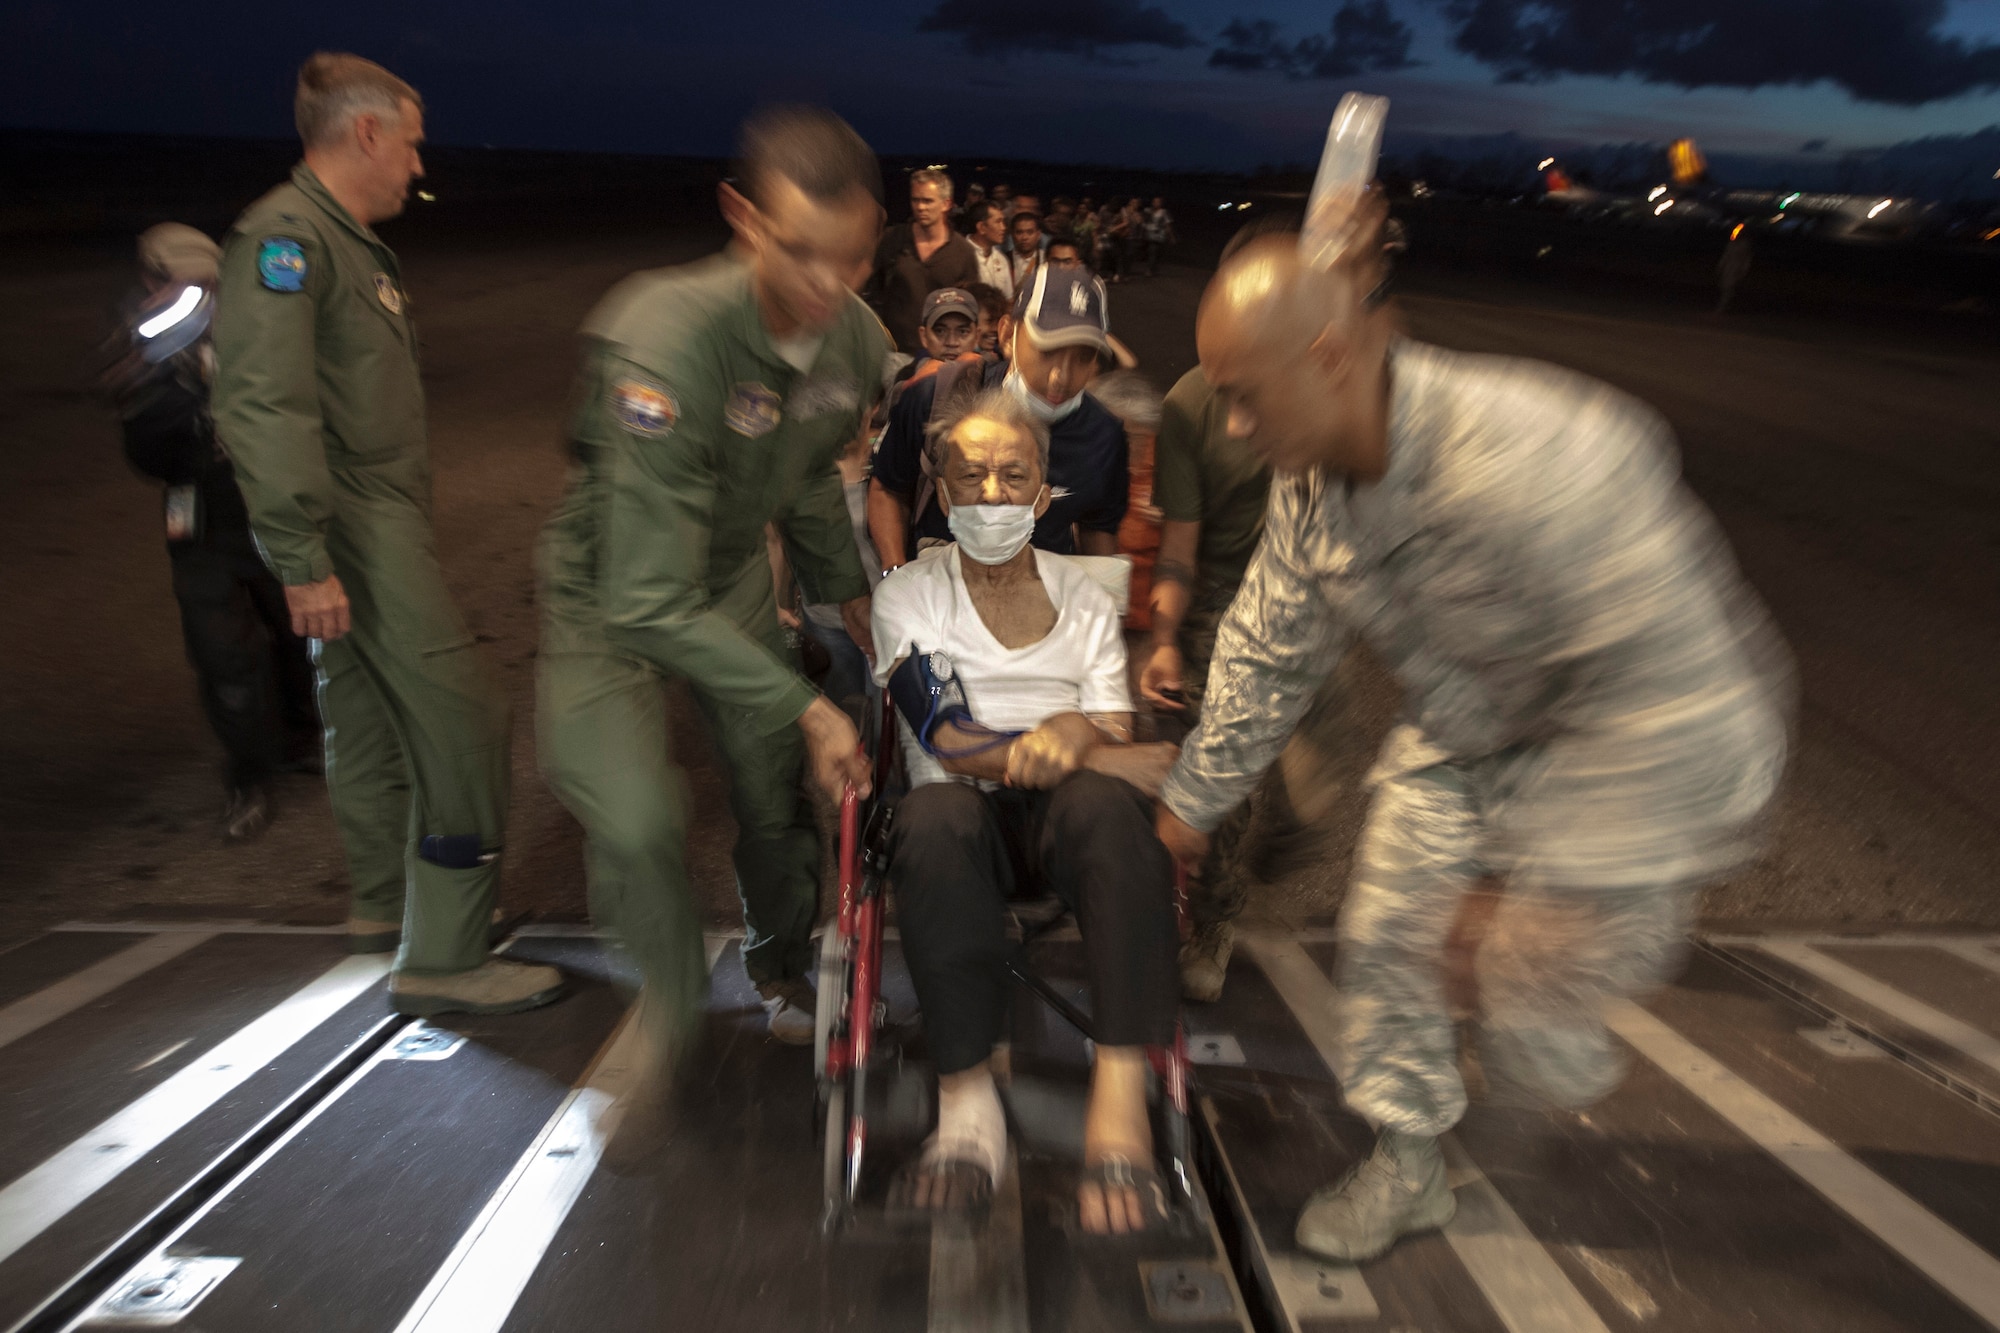 United States airmen assist an elderly Filipino in a wheelchair and other displaced persons aboard a C-17 Globemaster III with the 535th Air Lift Squadron out of Hickam Field, Honolulu, HI, for transport to Manila from Tacloban Air Field, Nov. 15. The supply drop-off and personnel loading was the first use of the C-17 during Operation Damayan, able to carry significantly more supplies and displaced persons than the C-130 Hercules aircraft currently being utilized. To date, the multi-national force has delivered more than 623,000 pounds of relief aid. The 3rd MEB is currently supporting the Armed Forces of the Philippines in providing humanitarian aid and disaster relief to areas affected by Super Typhoon Haiyan/Yolanda.